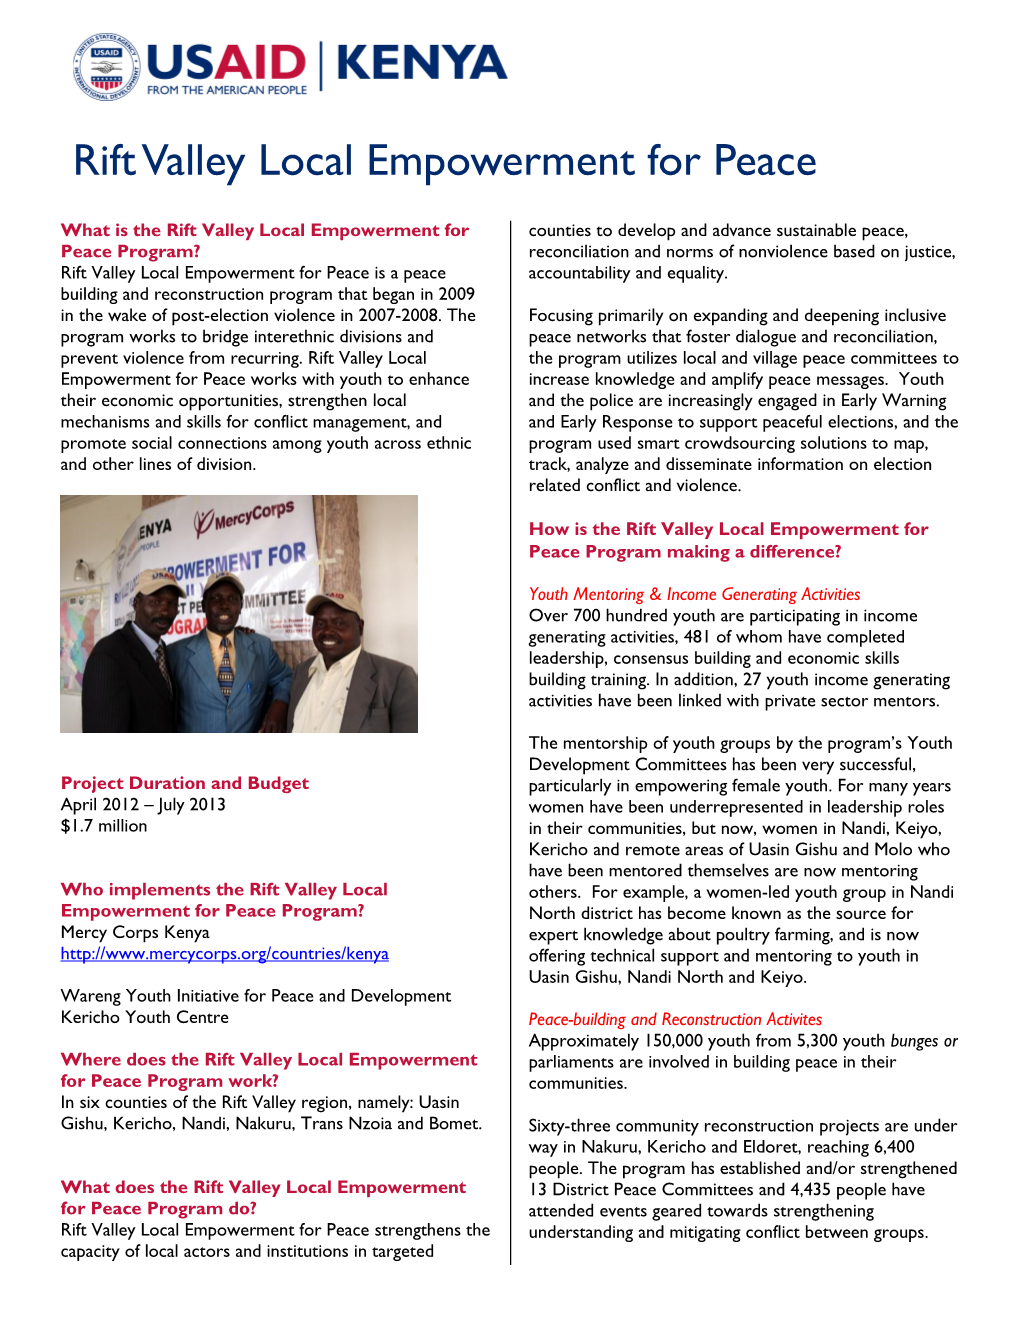 Rift Valley Local Empowerment for Peace